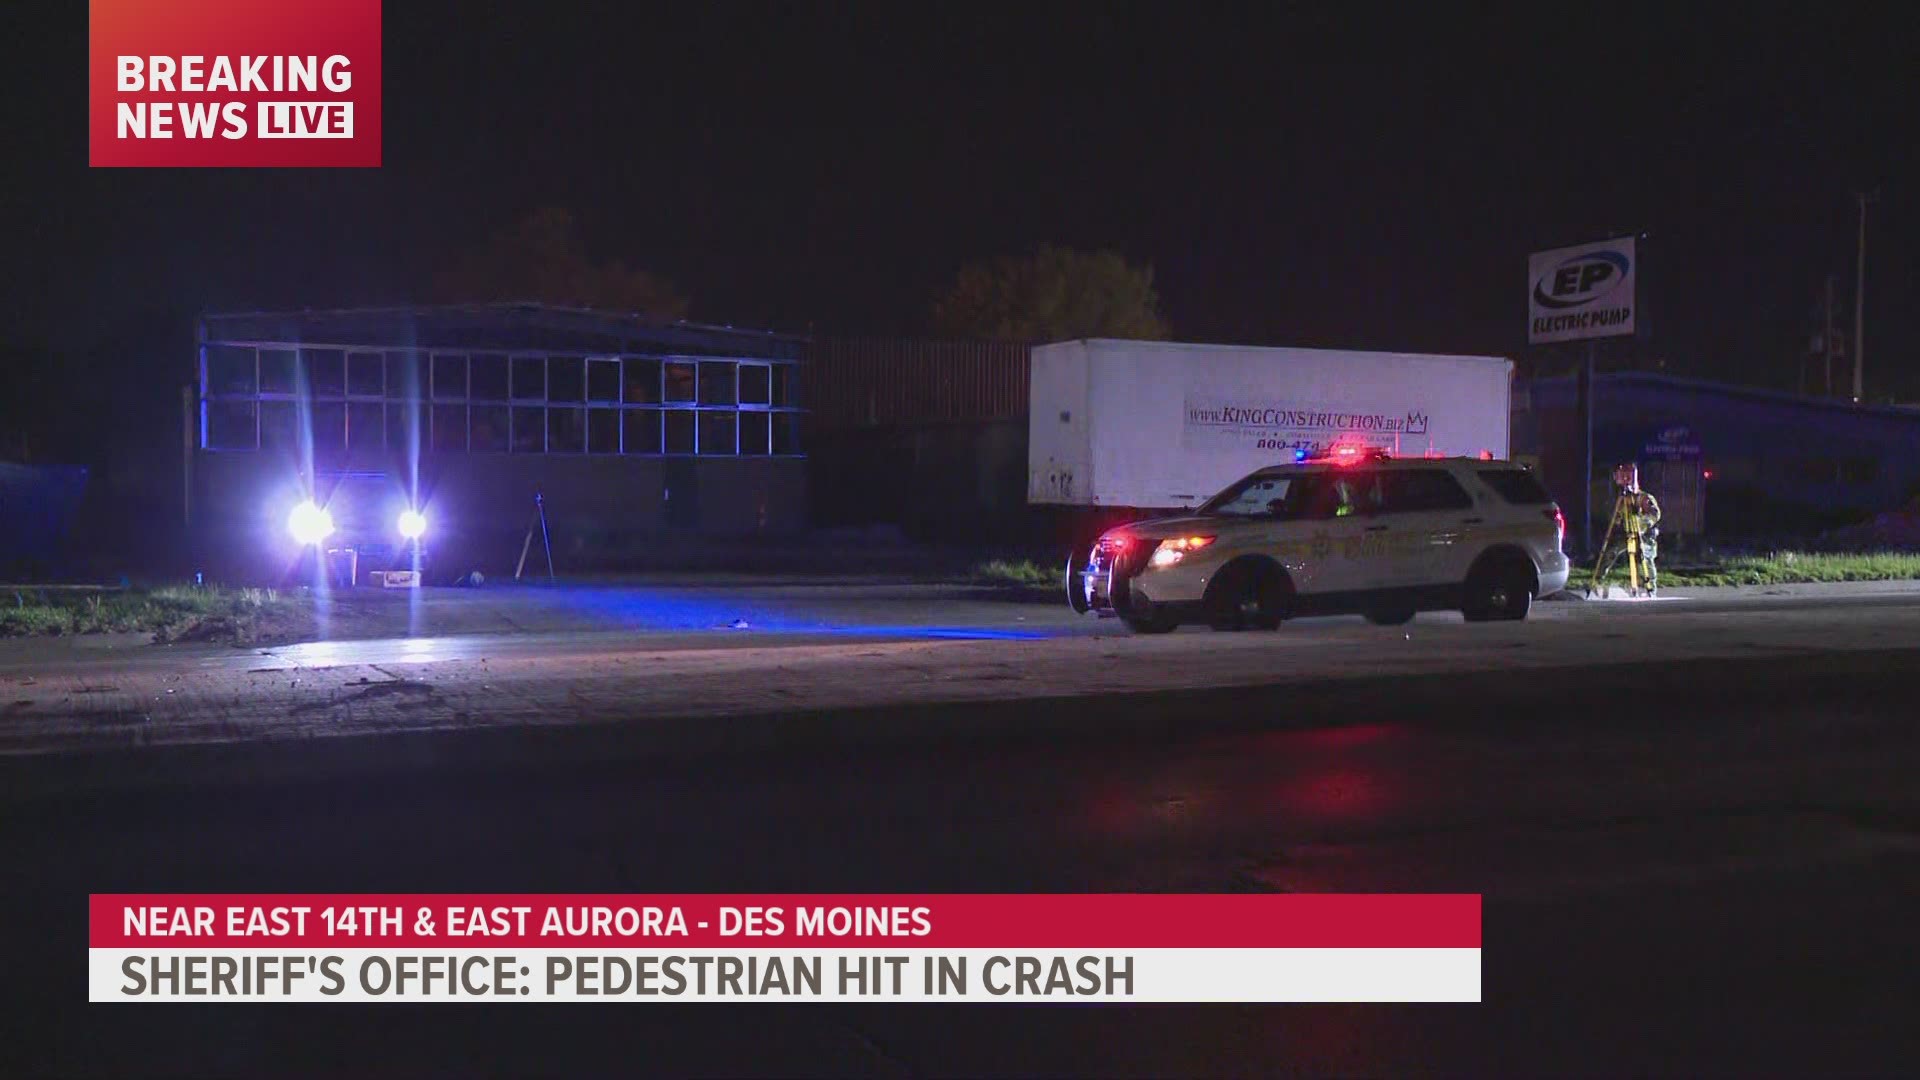 The accident happened at E 14th Street and Aurora Avenue in Des Moines. The area is closed off.